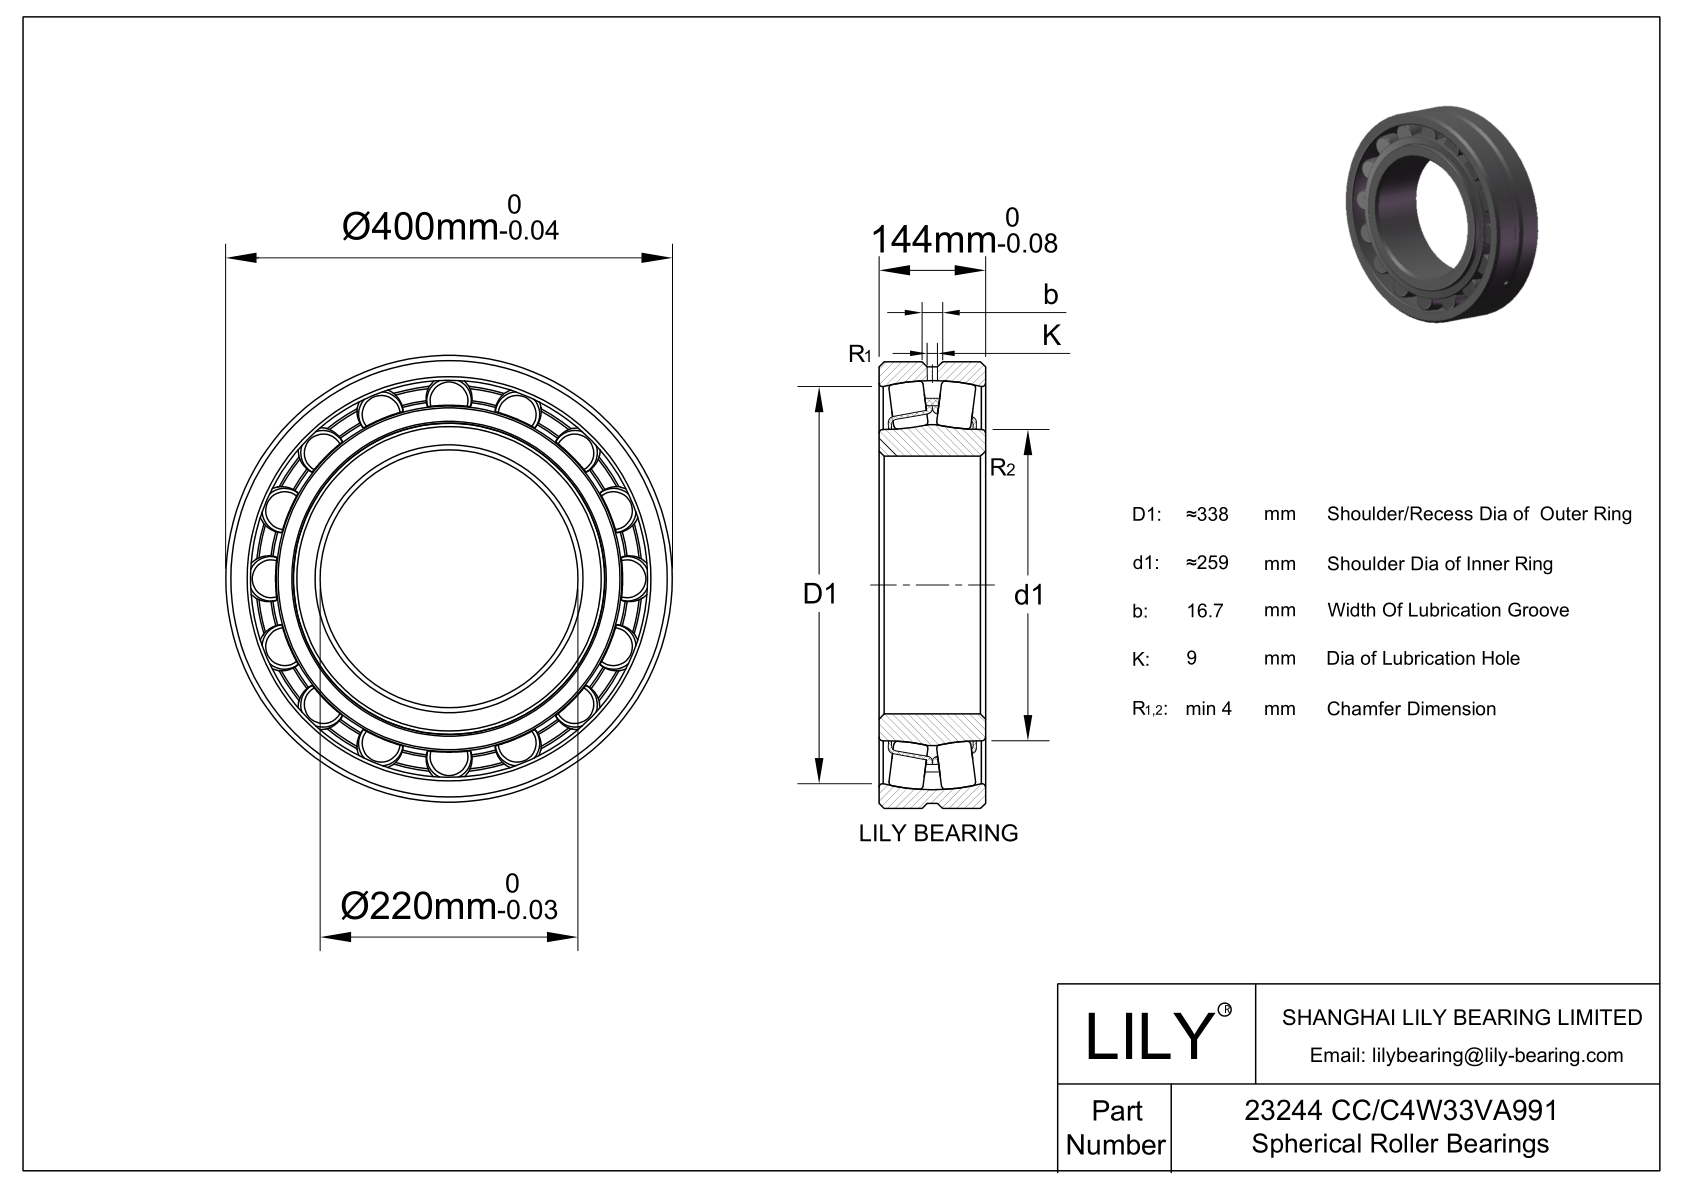 23244 CC/C4W33VA991 Double Row Spherical Roller Bearing cad drawing